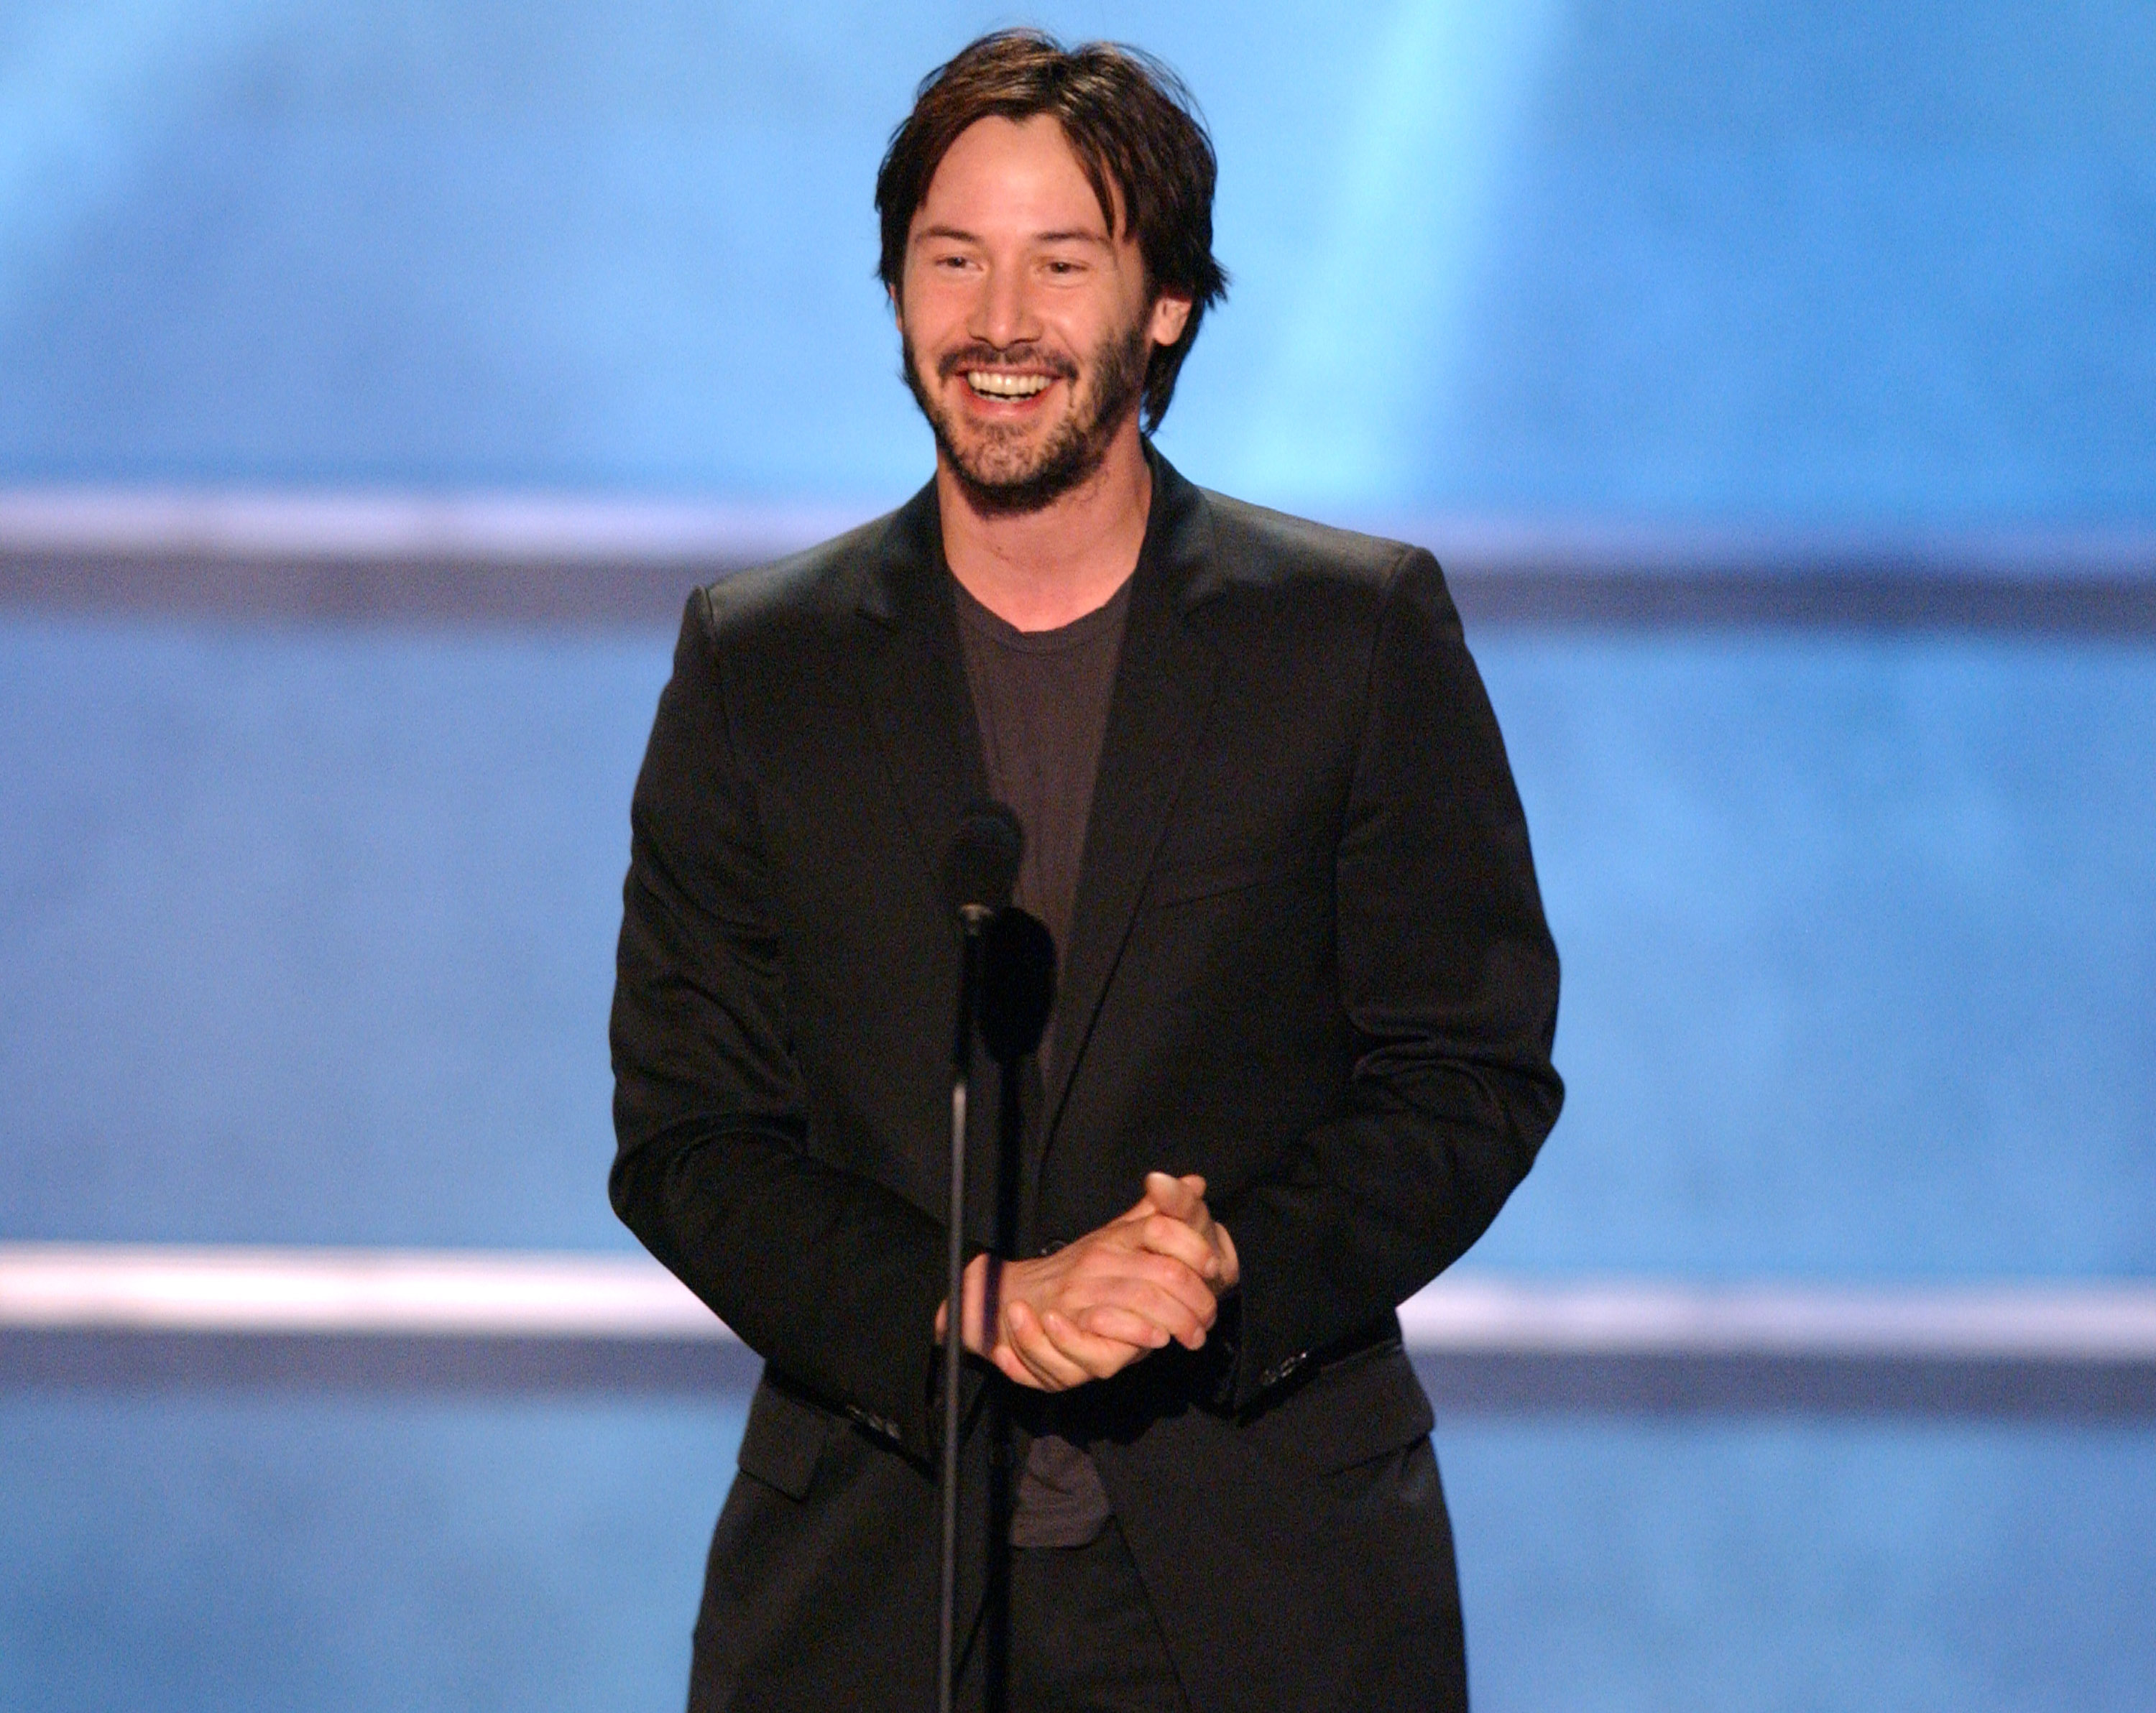 Keanu Reeves accepts the Taurus Honorary Award for Action Movie Star